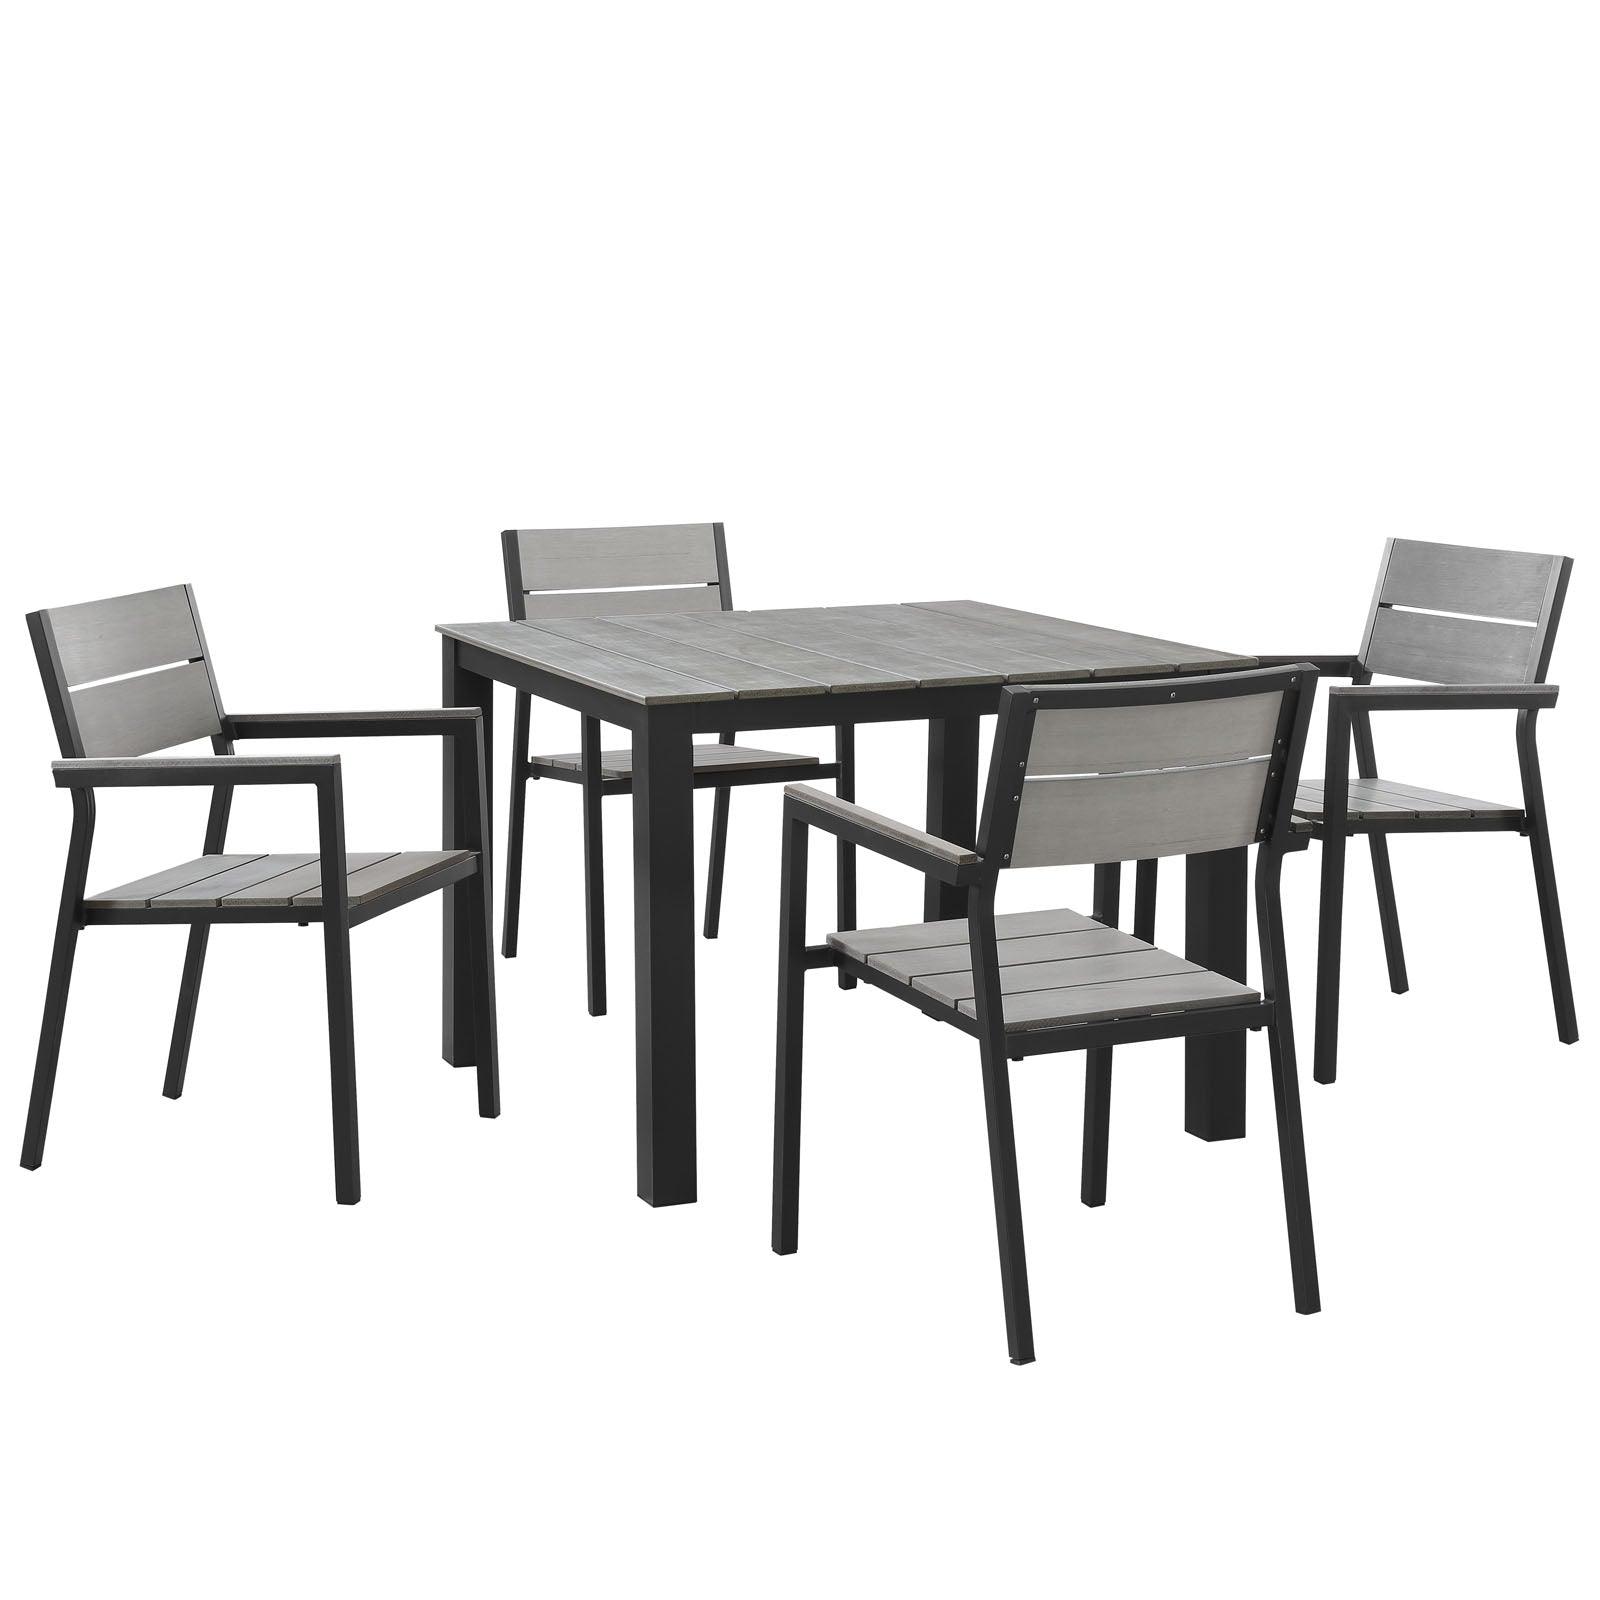 Modway Maine 5 Piece Outdoor Patio Dining Set FredCo